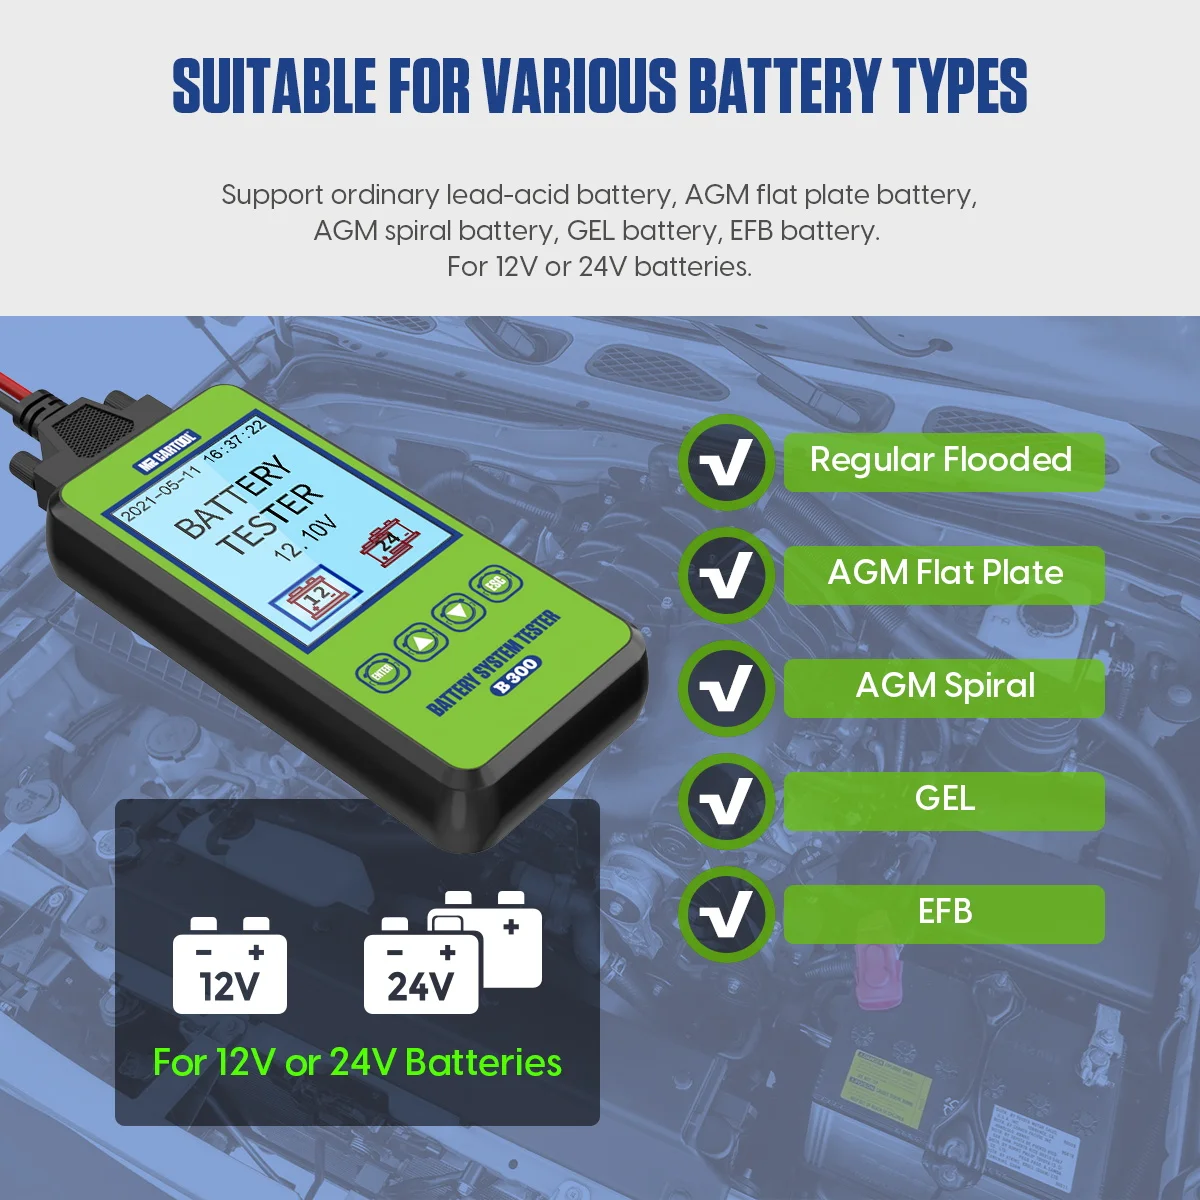 B300 battery tester for car suitble for various battery types